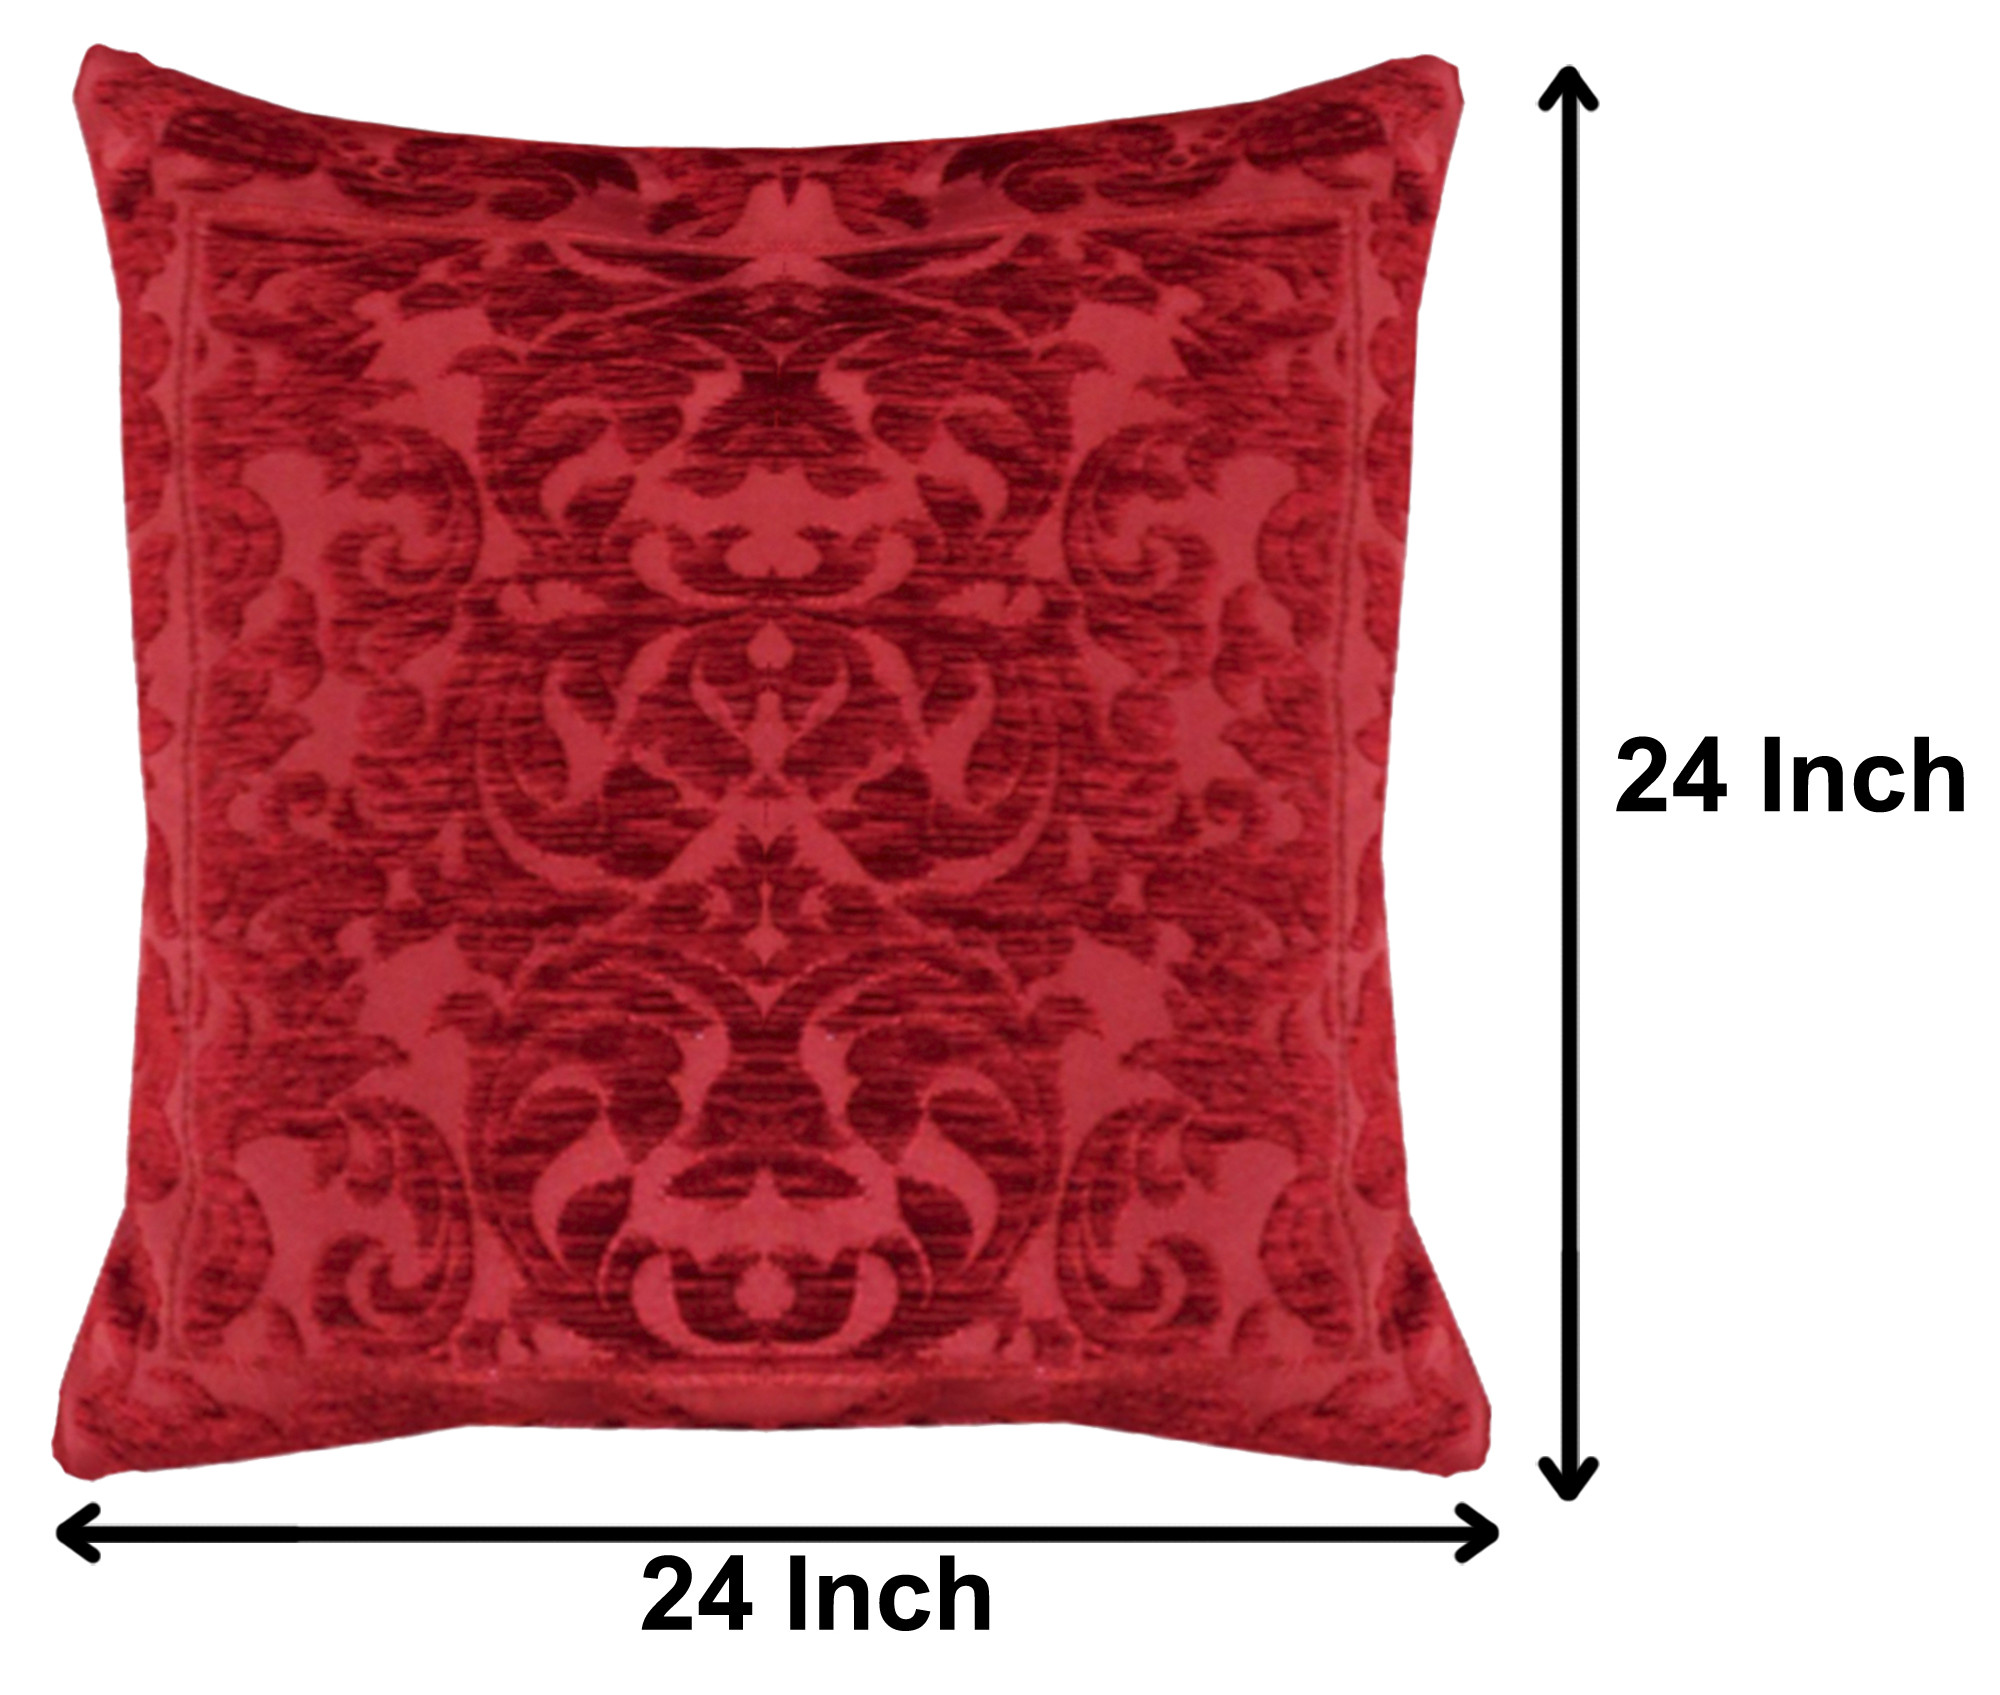 Kuber Industries Velvet Soft Decorative Square Throw Pillow Cover Cushion Covers Pillow case, Home Decor Decorations for Sofa Couch Bed Chair 24x24 Inch (Maroon)